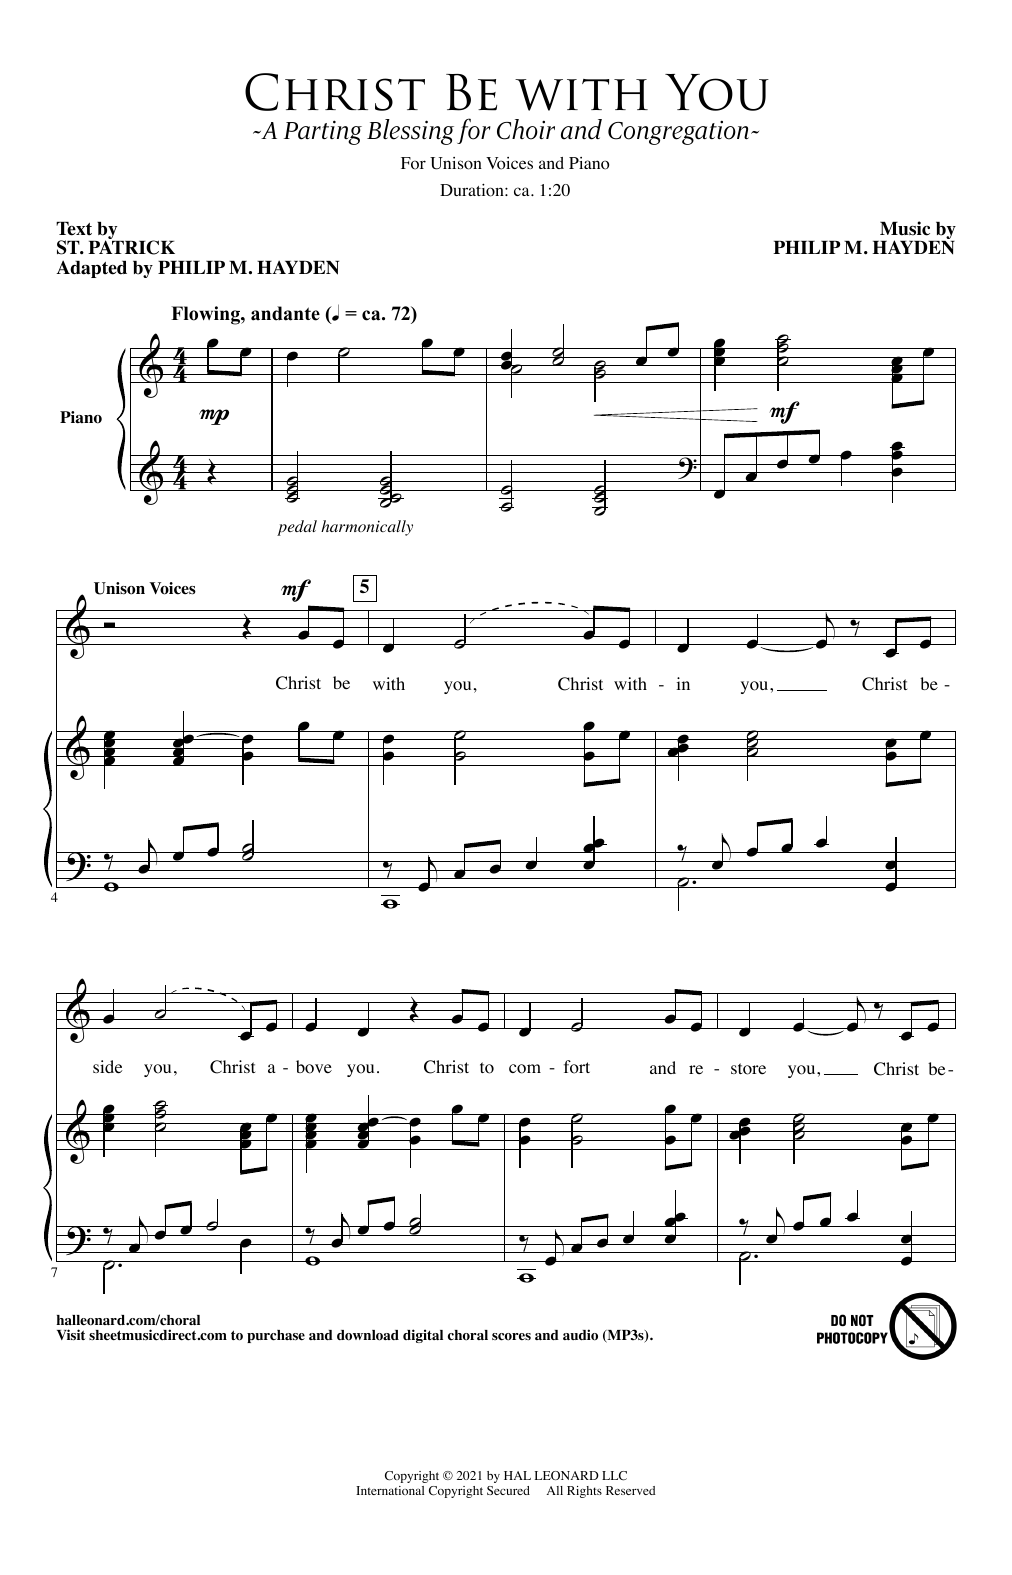 Download Philip M. Hayden Christ Be With You (A Parting Blessing Sheet Music